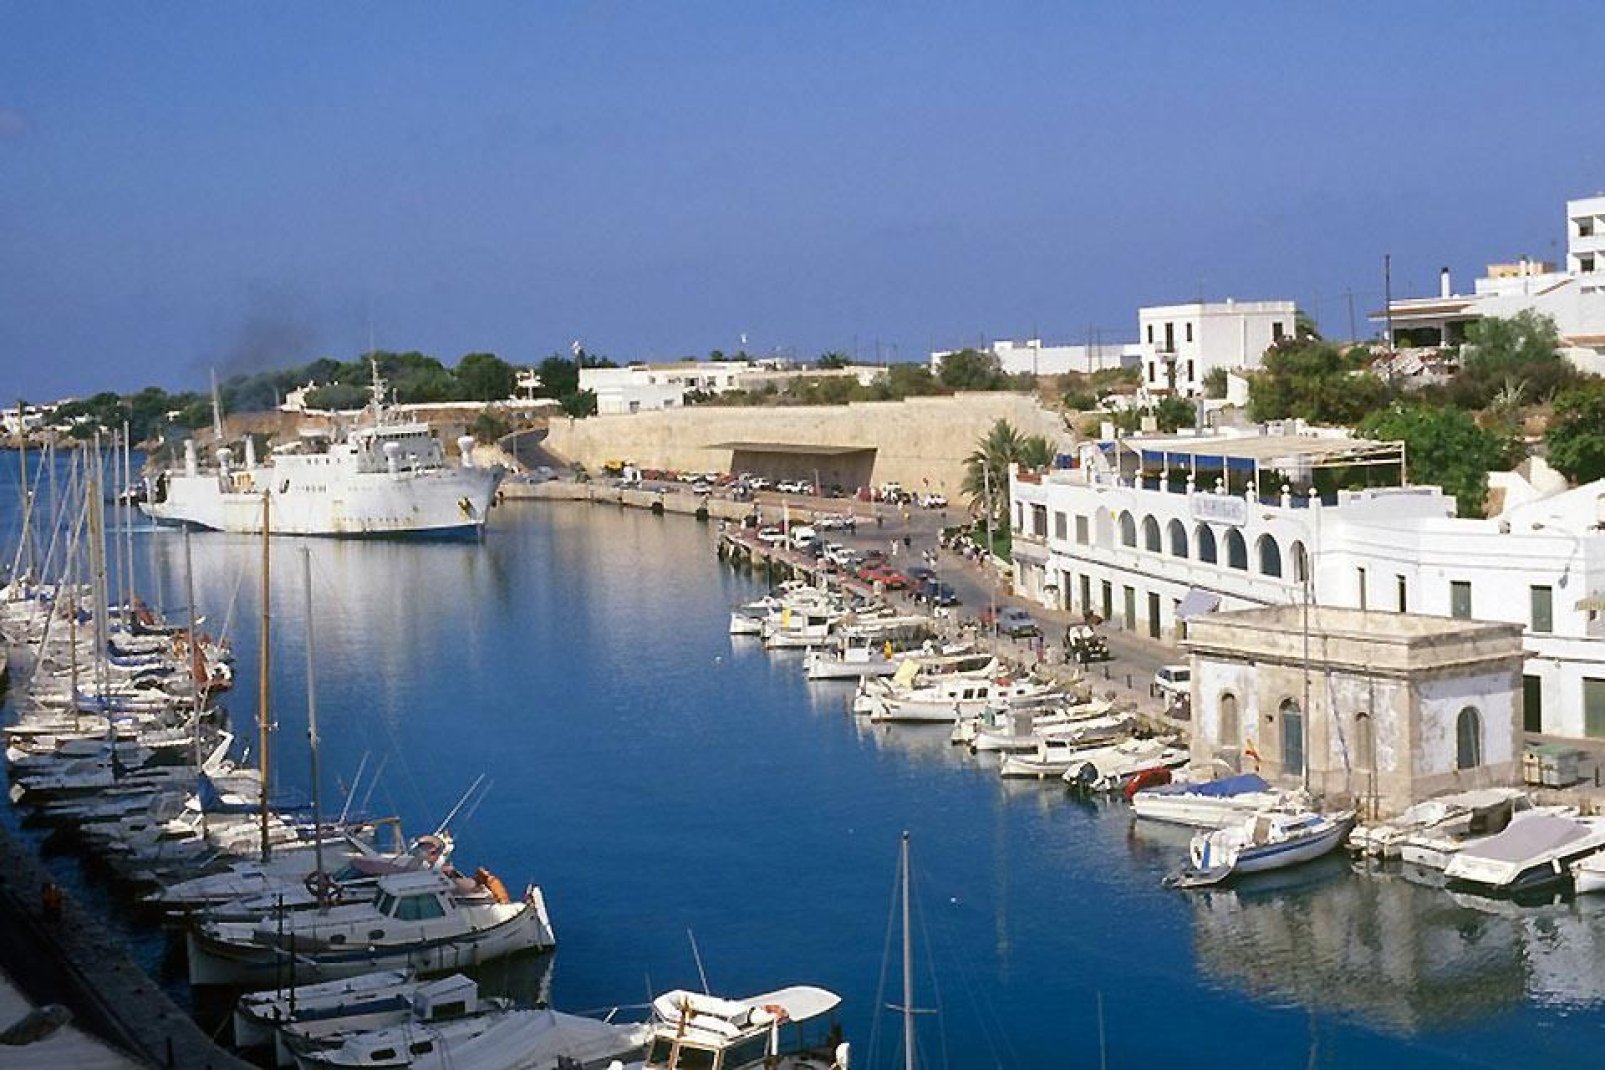 Ciutadella is the second biggest town in Menorca, after the capital Mahon.